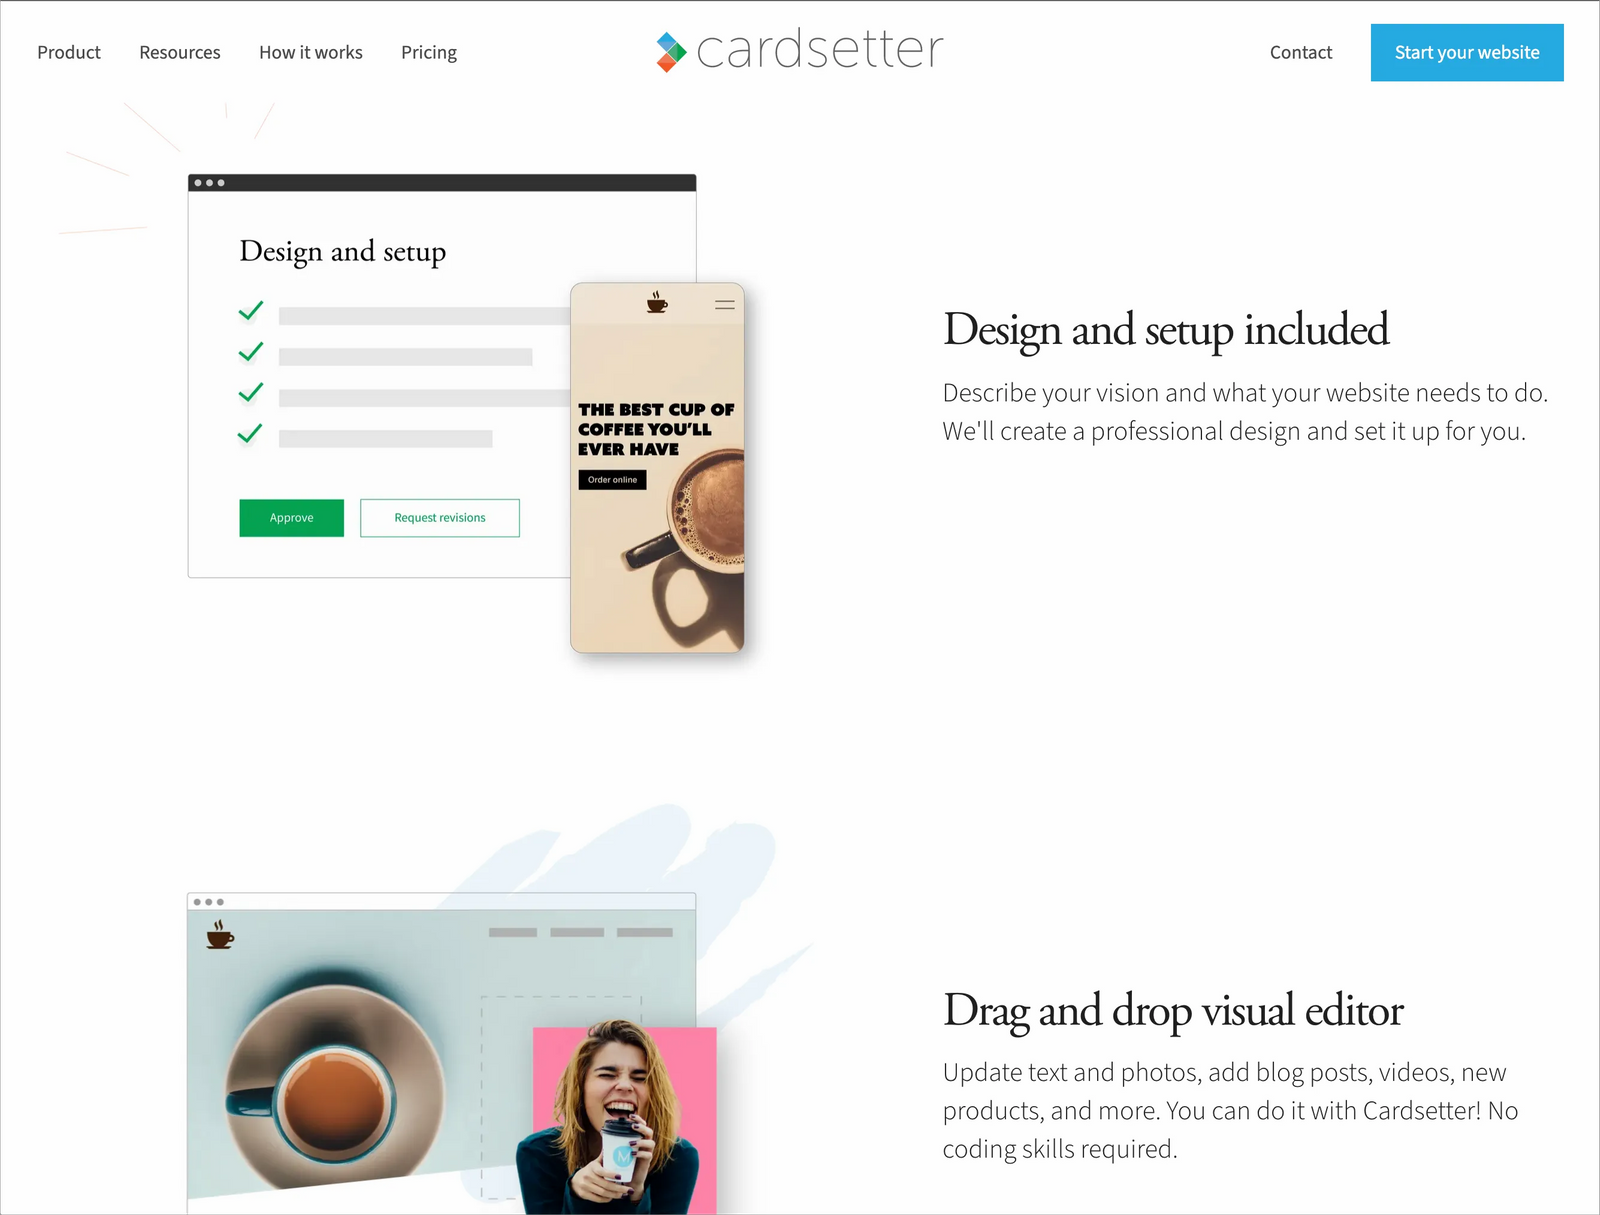 Image of Cardsetter's website showing example of features section